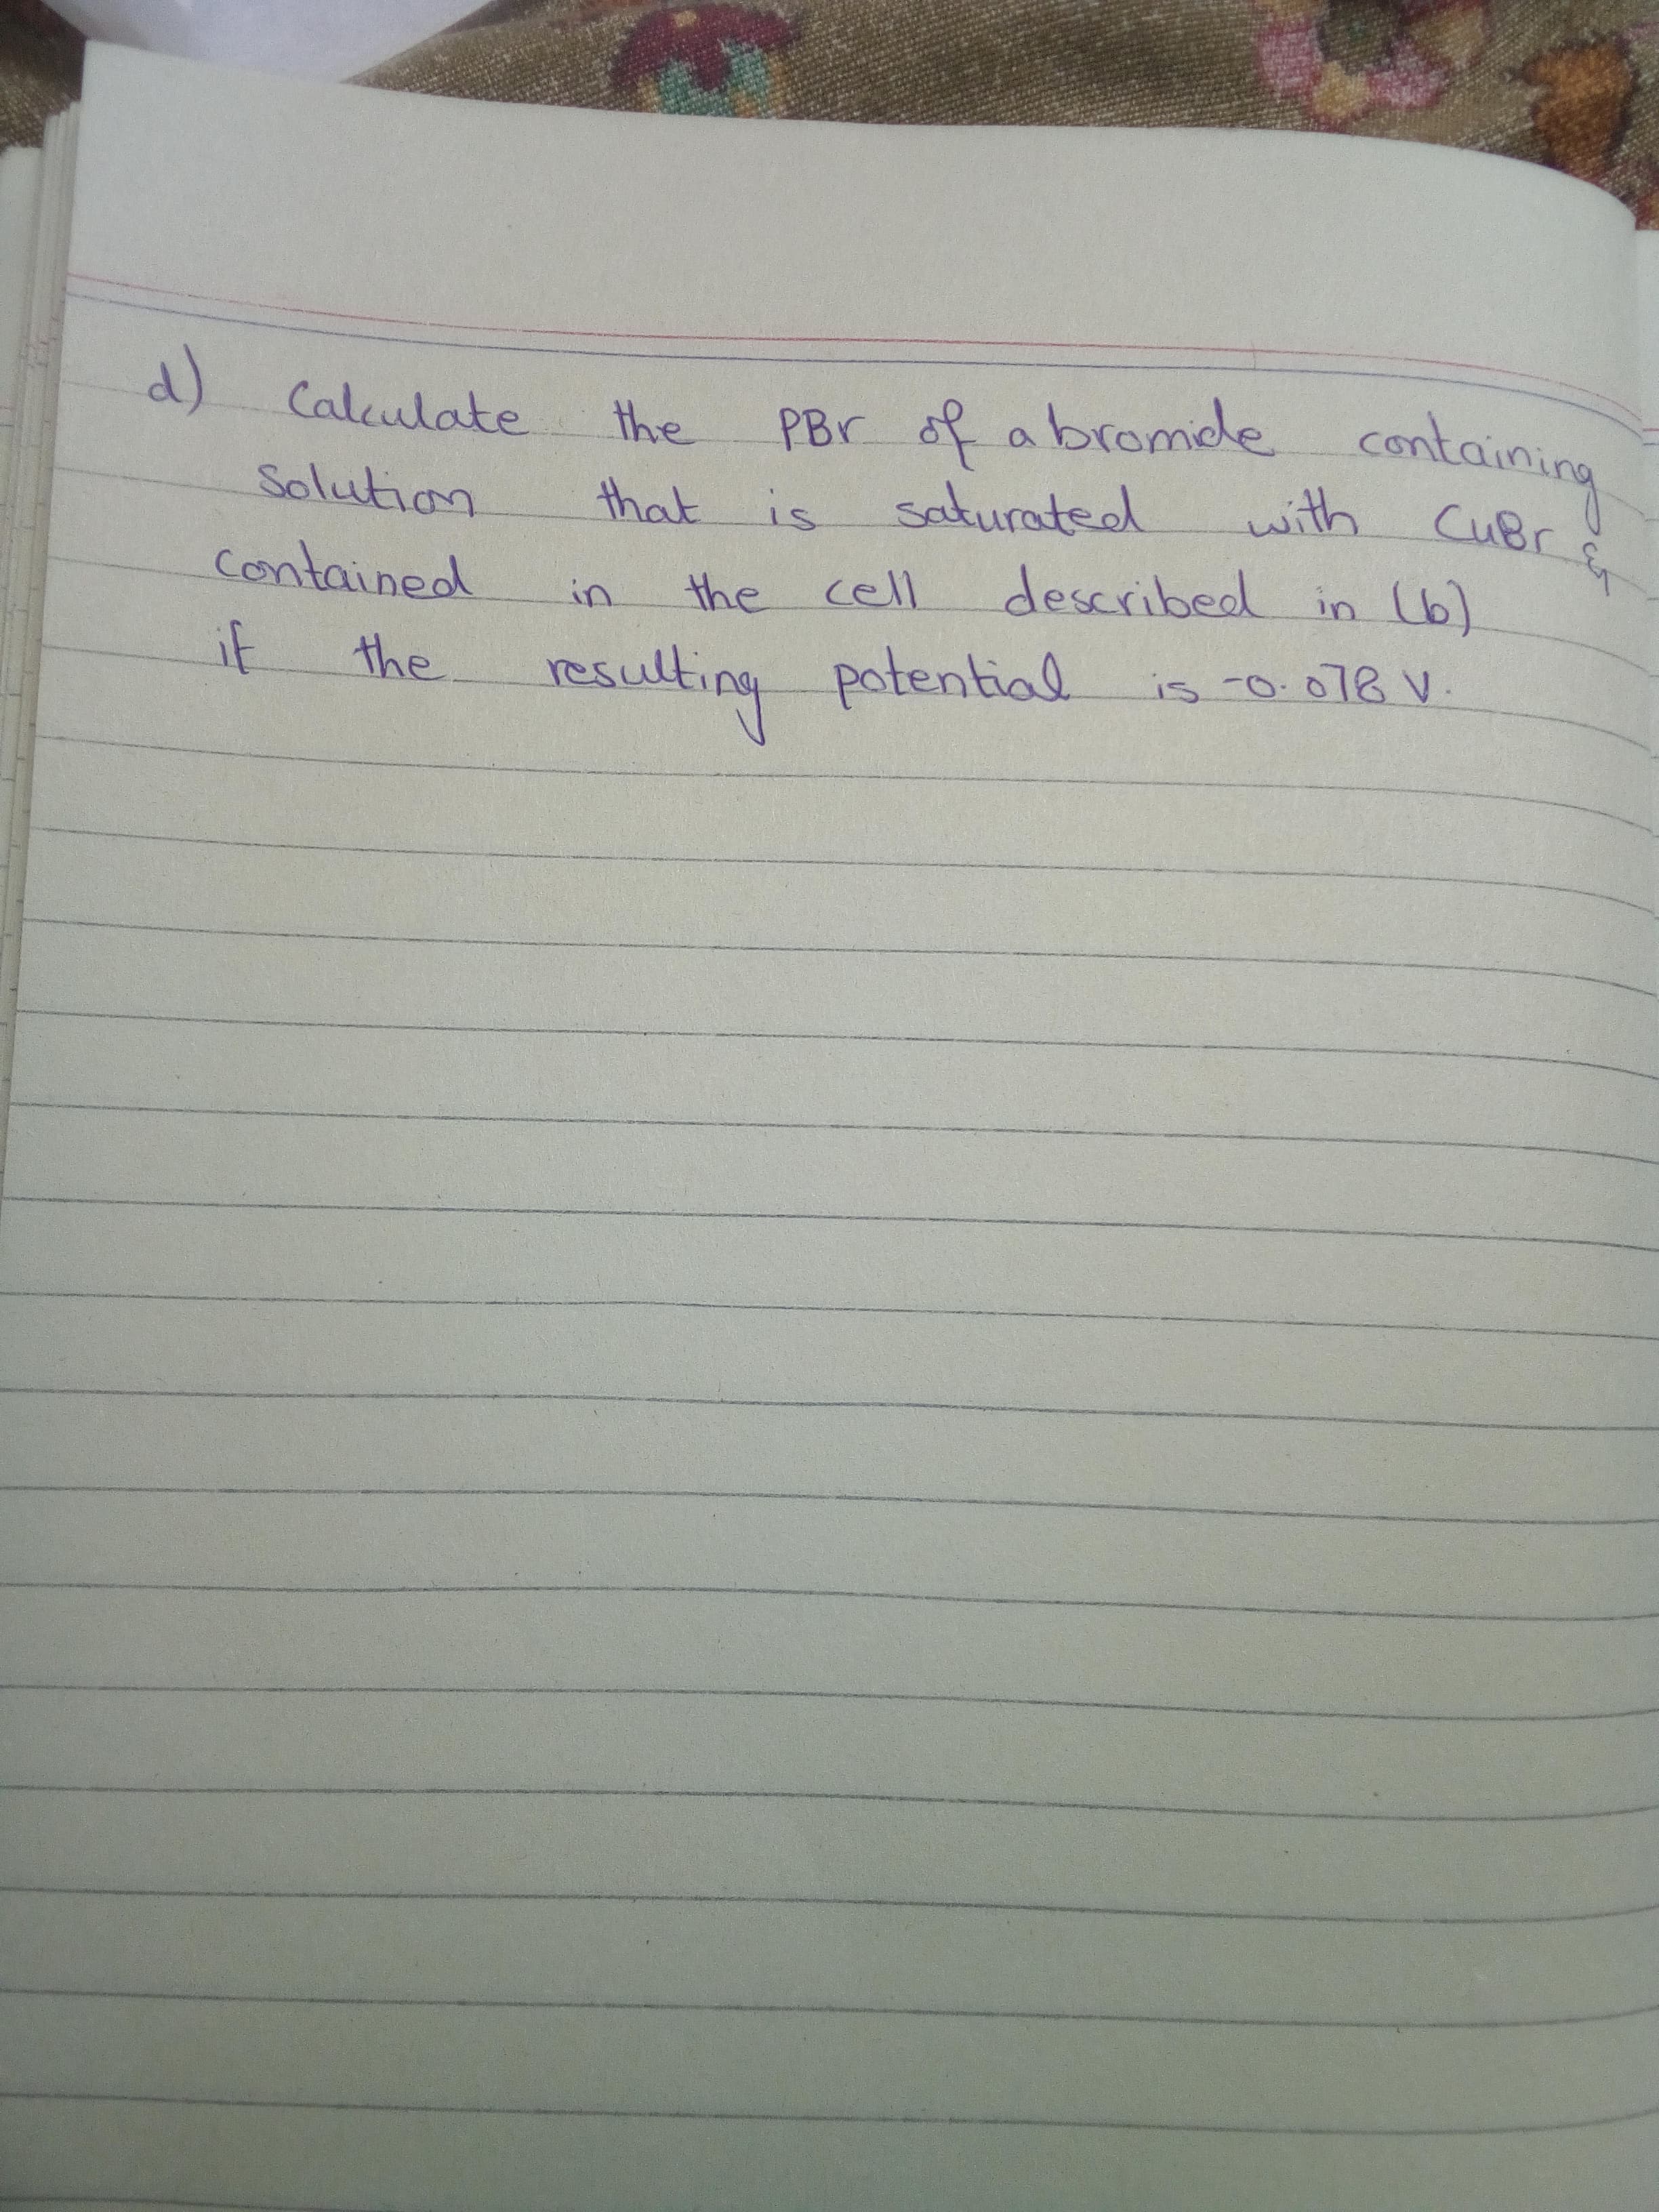 d) Calculate
PBr of abromde containing
the
with
saturated
described in (6)
Solution
that is
CUBr
contained
the cell
in
if
the r
sulting potential
is 0.018 V.
